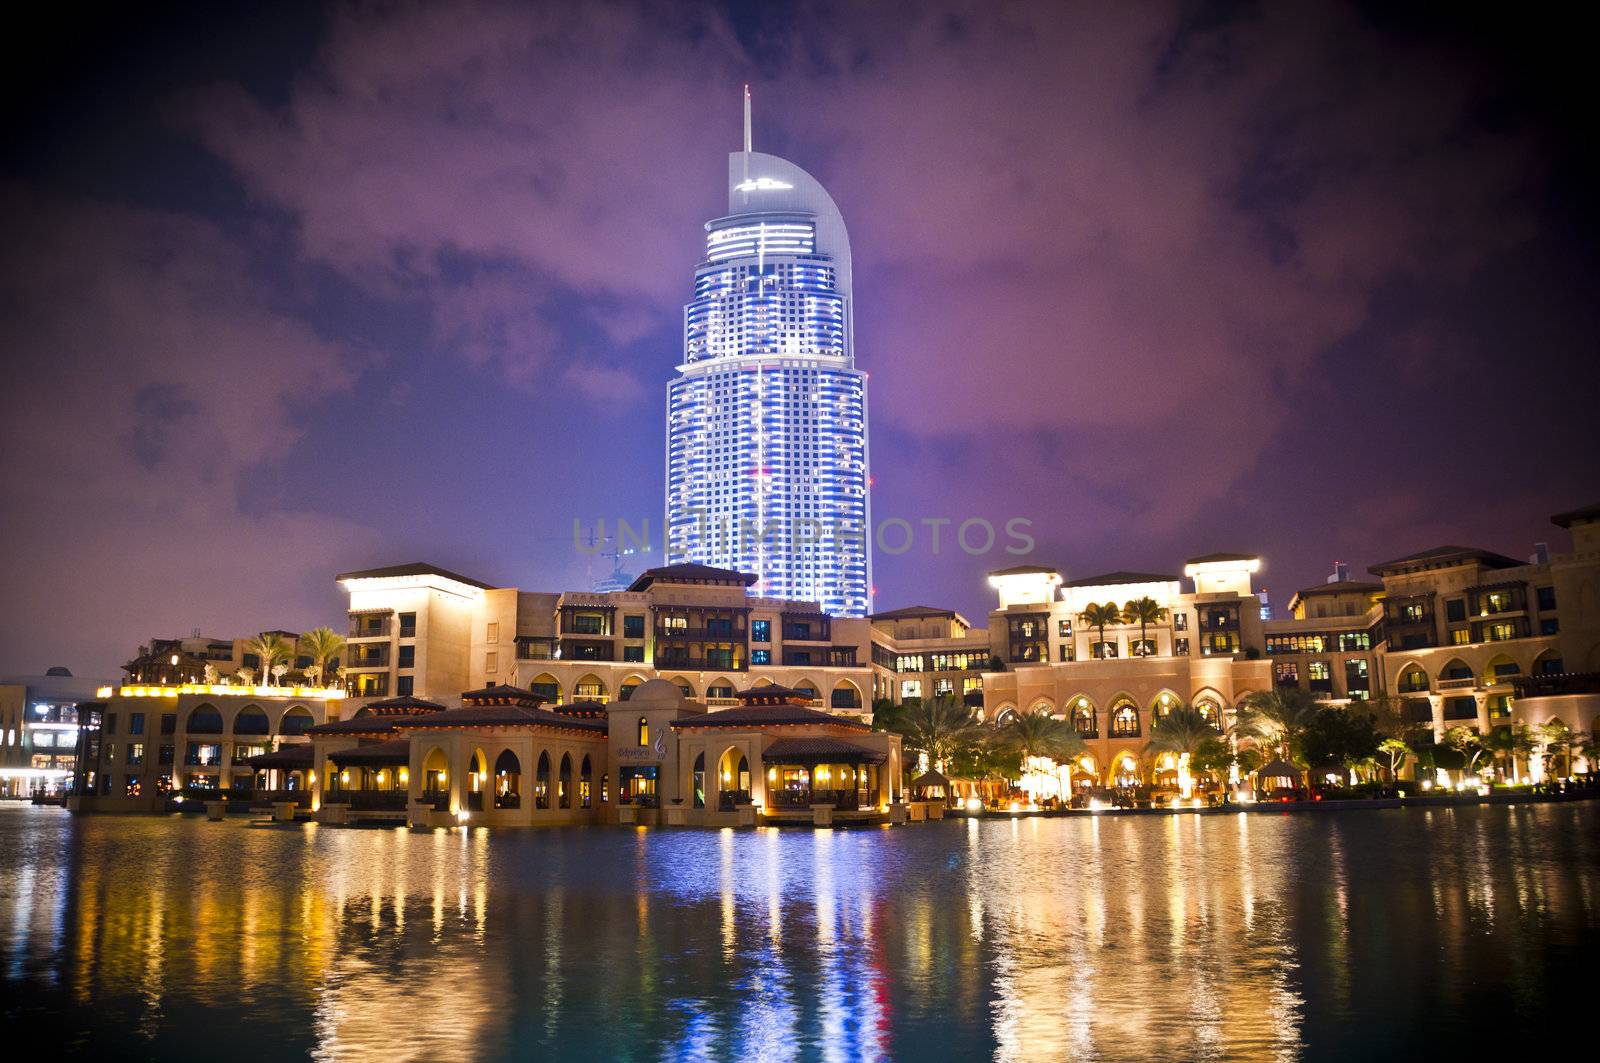 FEB 27- DUBAI, UAE : A nightshot of the Address Hotel and the luxurious buildings of Souk al Bahar with reflection on the water